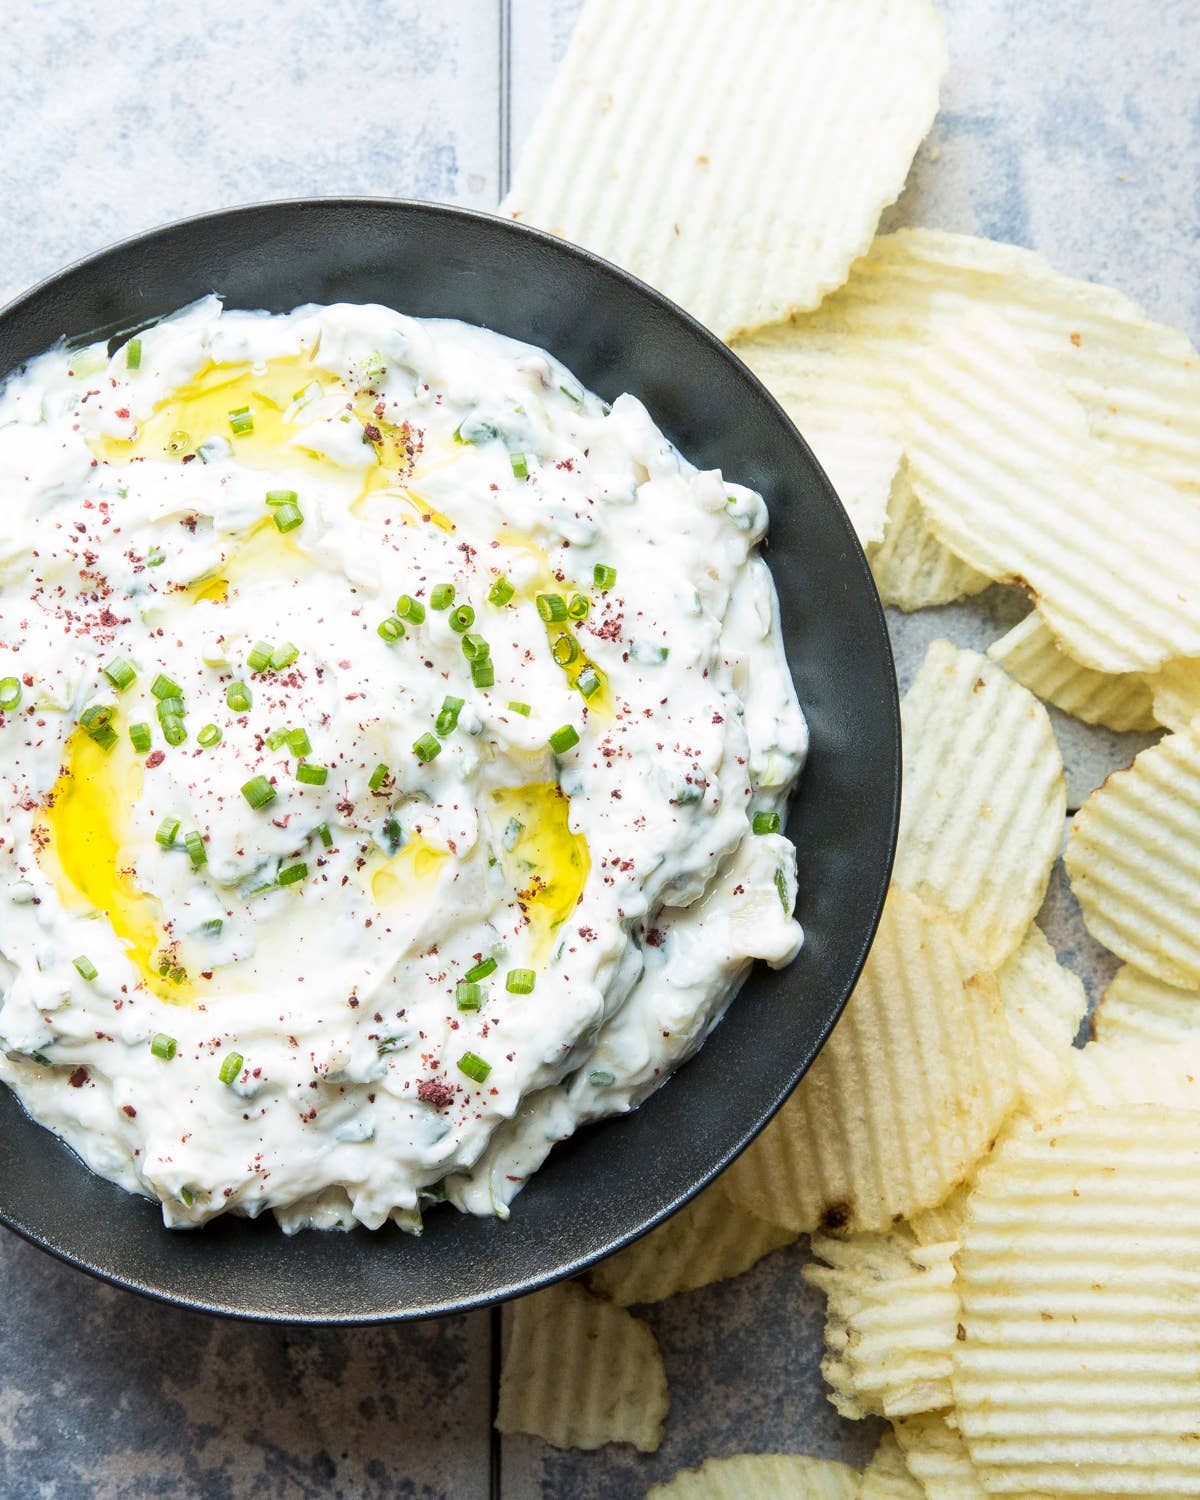 A Lighter Kind of Onion Dip